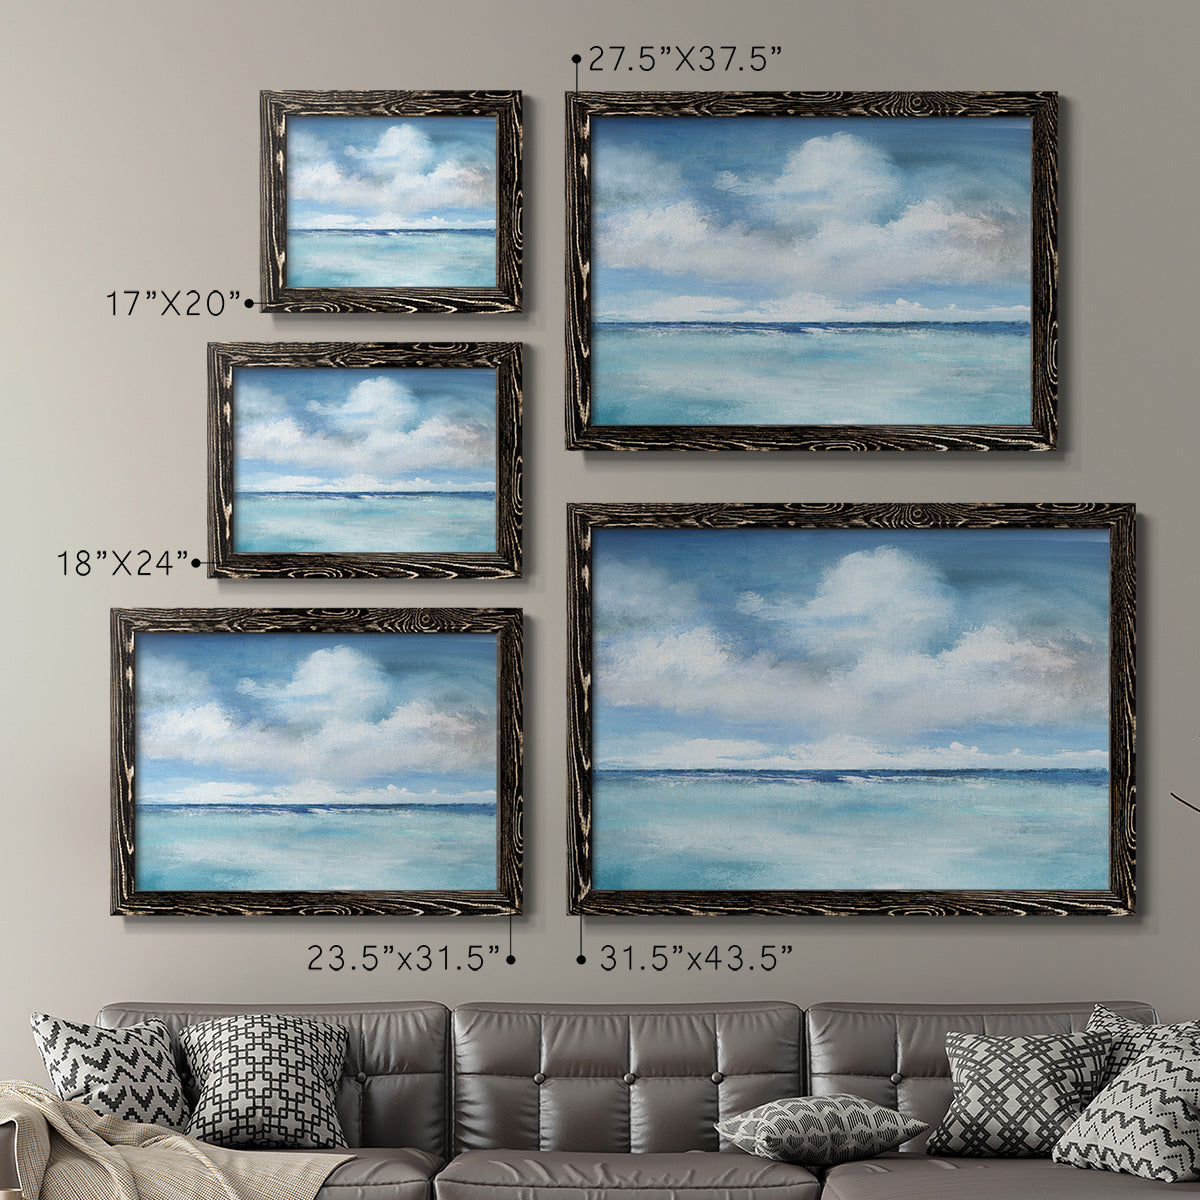 Caribbean Clouds-Premium Framed Canvas - Ready to Hang